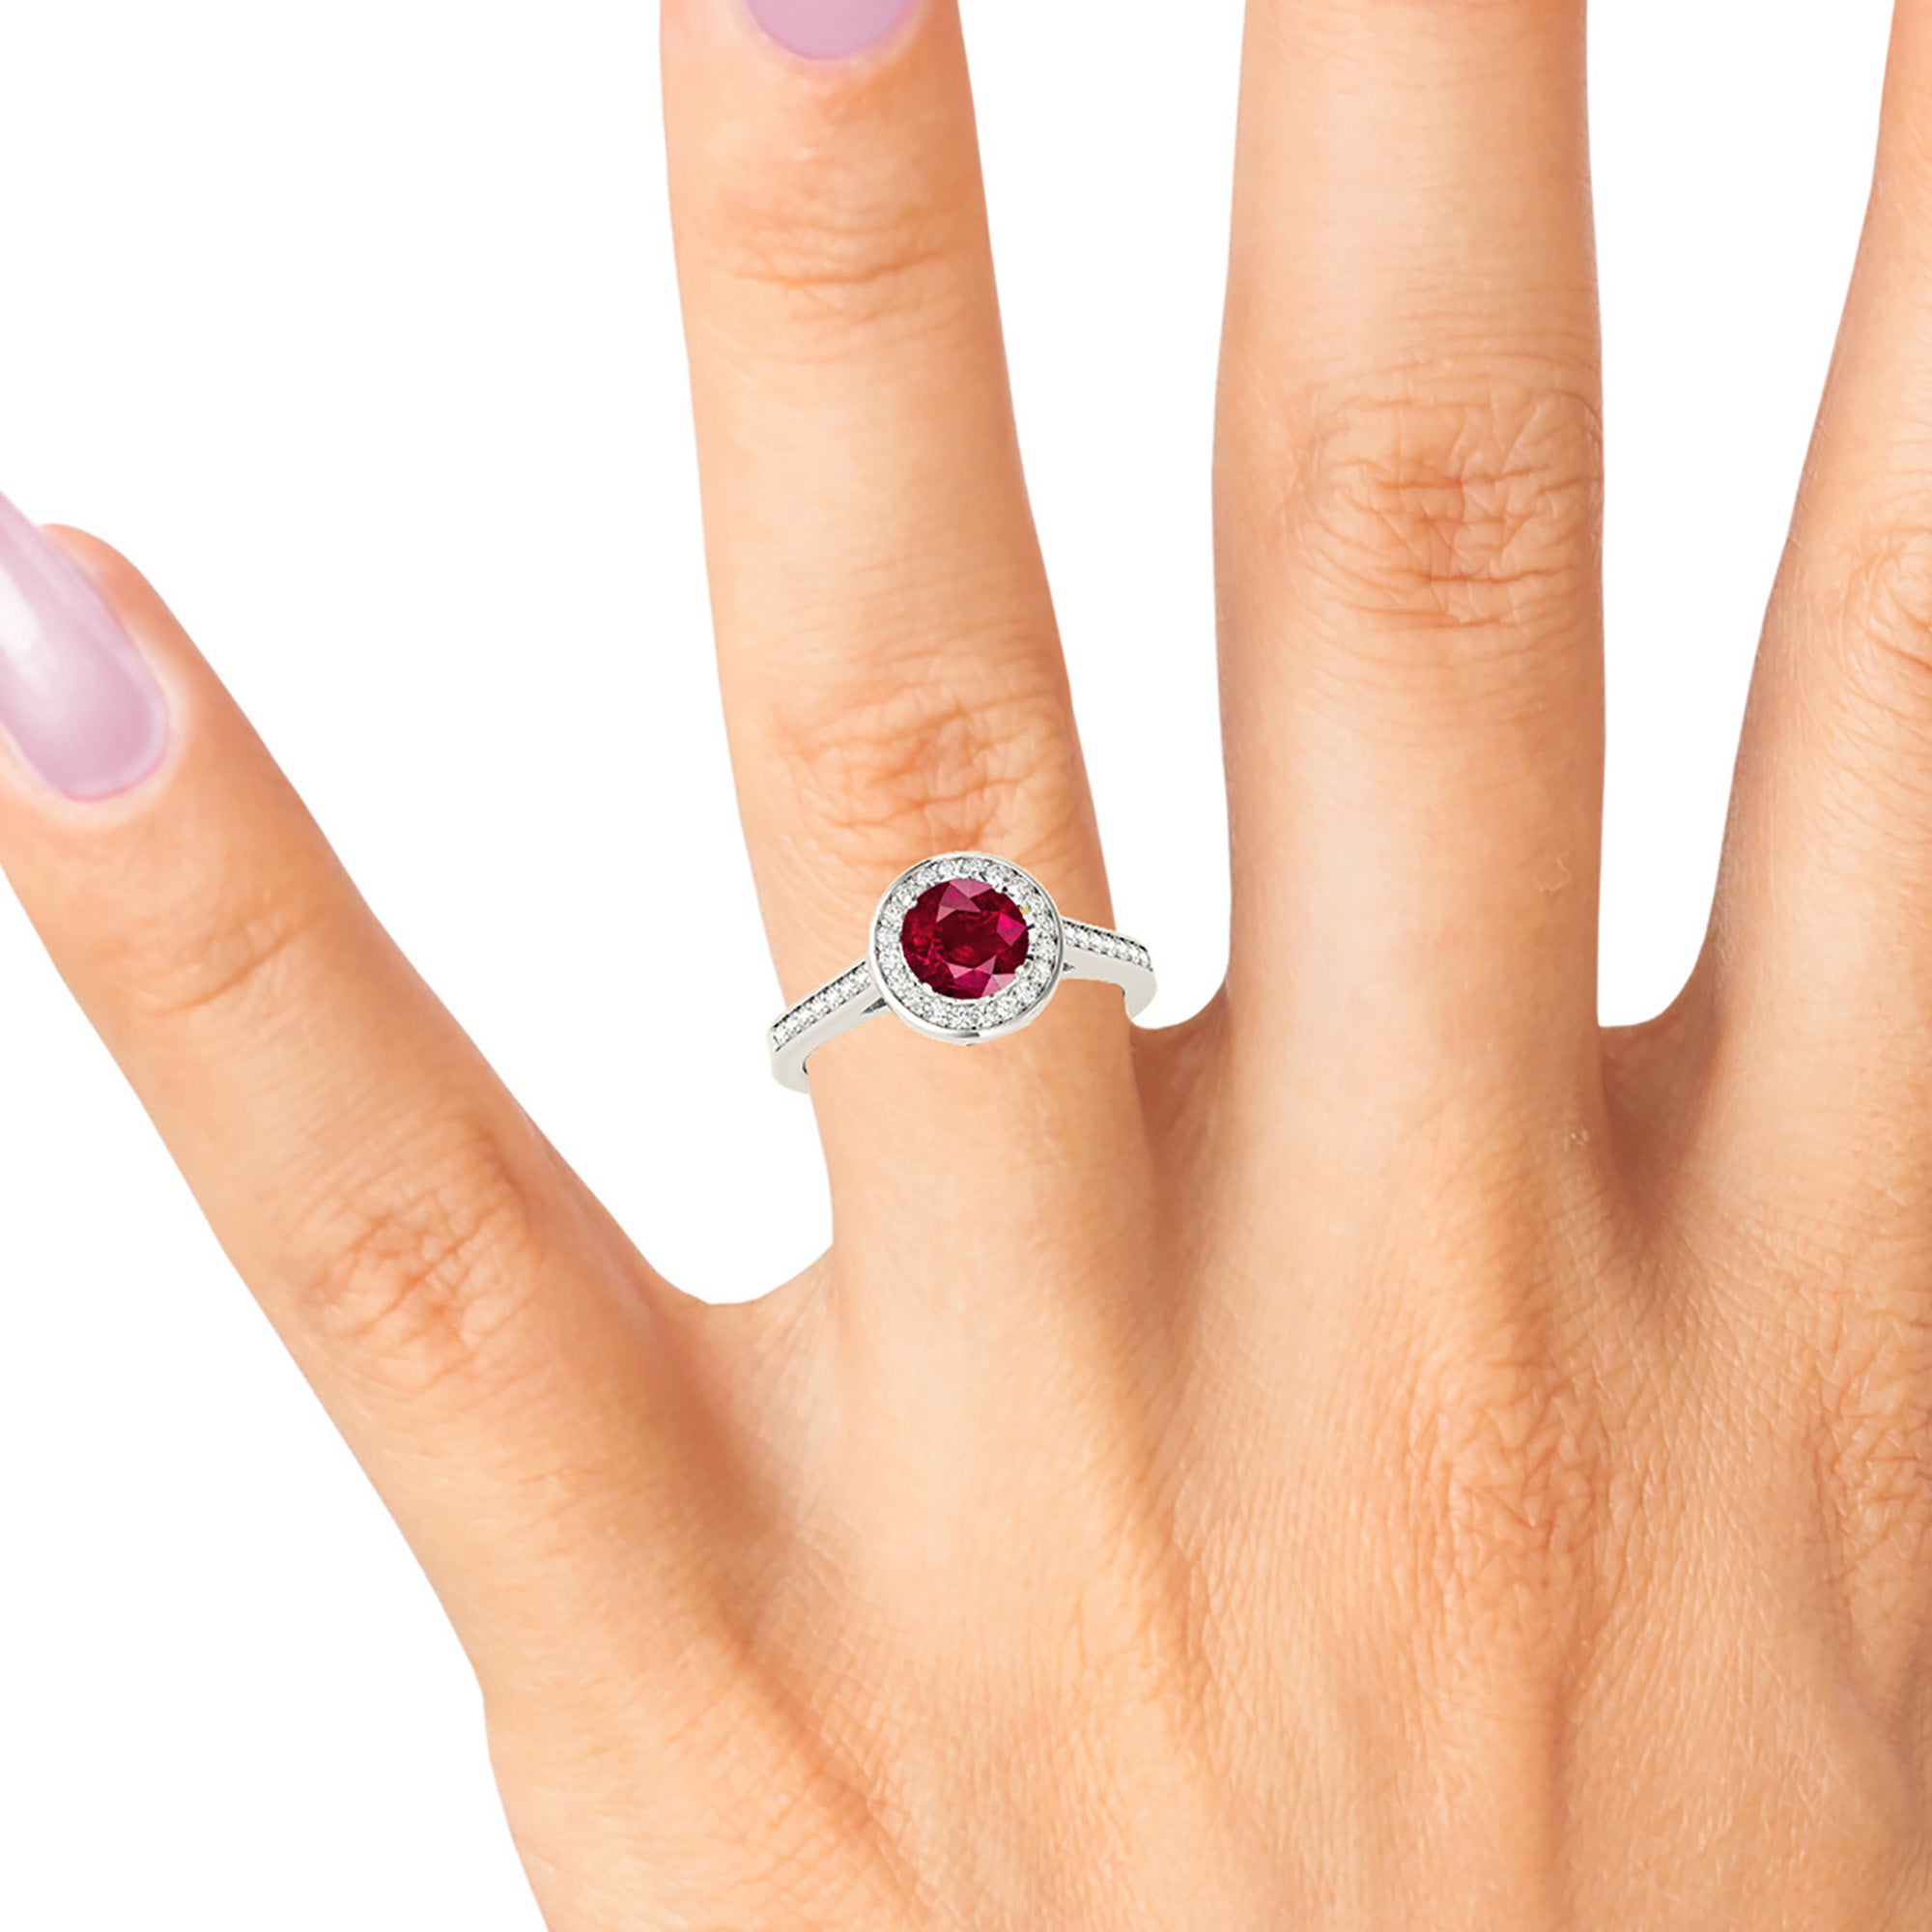 1.35 ct. Genuine Ruby Ring With 0.25 ctw. Diamond Halo, Delicate Diamond Band, Underneath Accent Diamond |Ruby Halo Ring | Natural Ruby Ring-in 14K/18K White, Yellow, Rose Gold and Platinum - Christmas Jewelry Gift -VIRABYANI